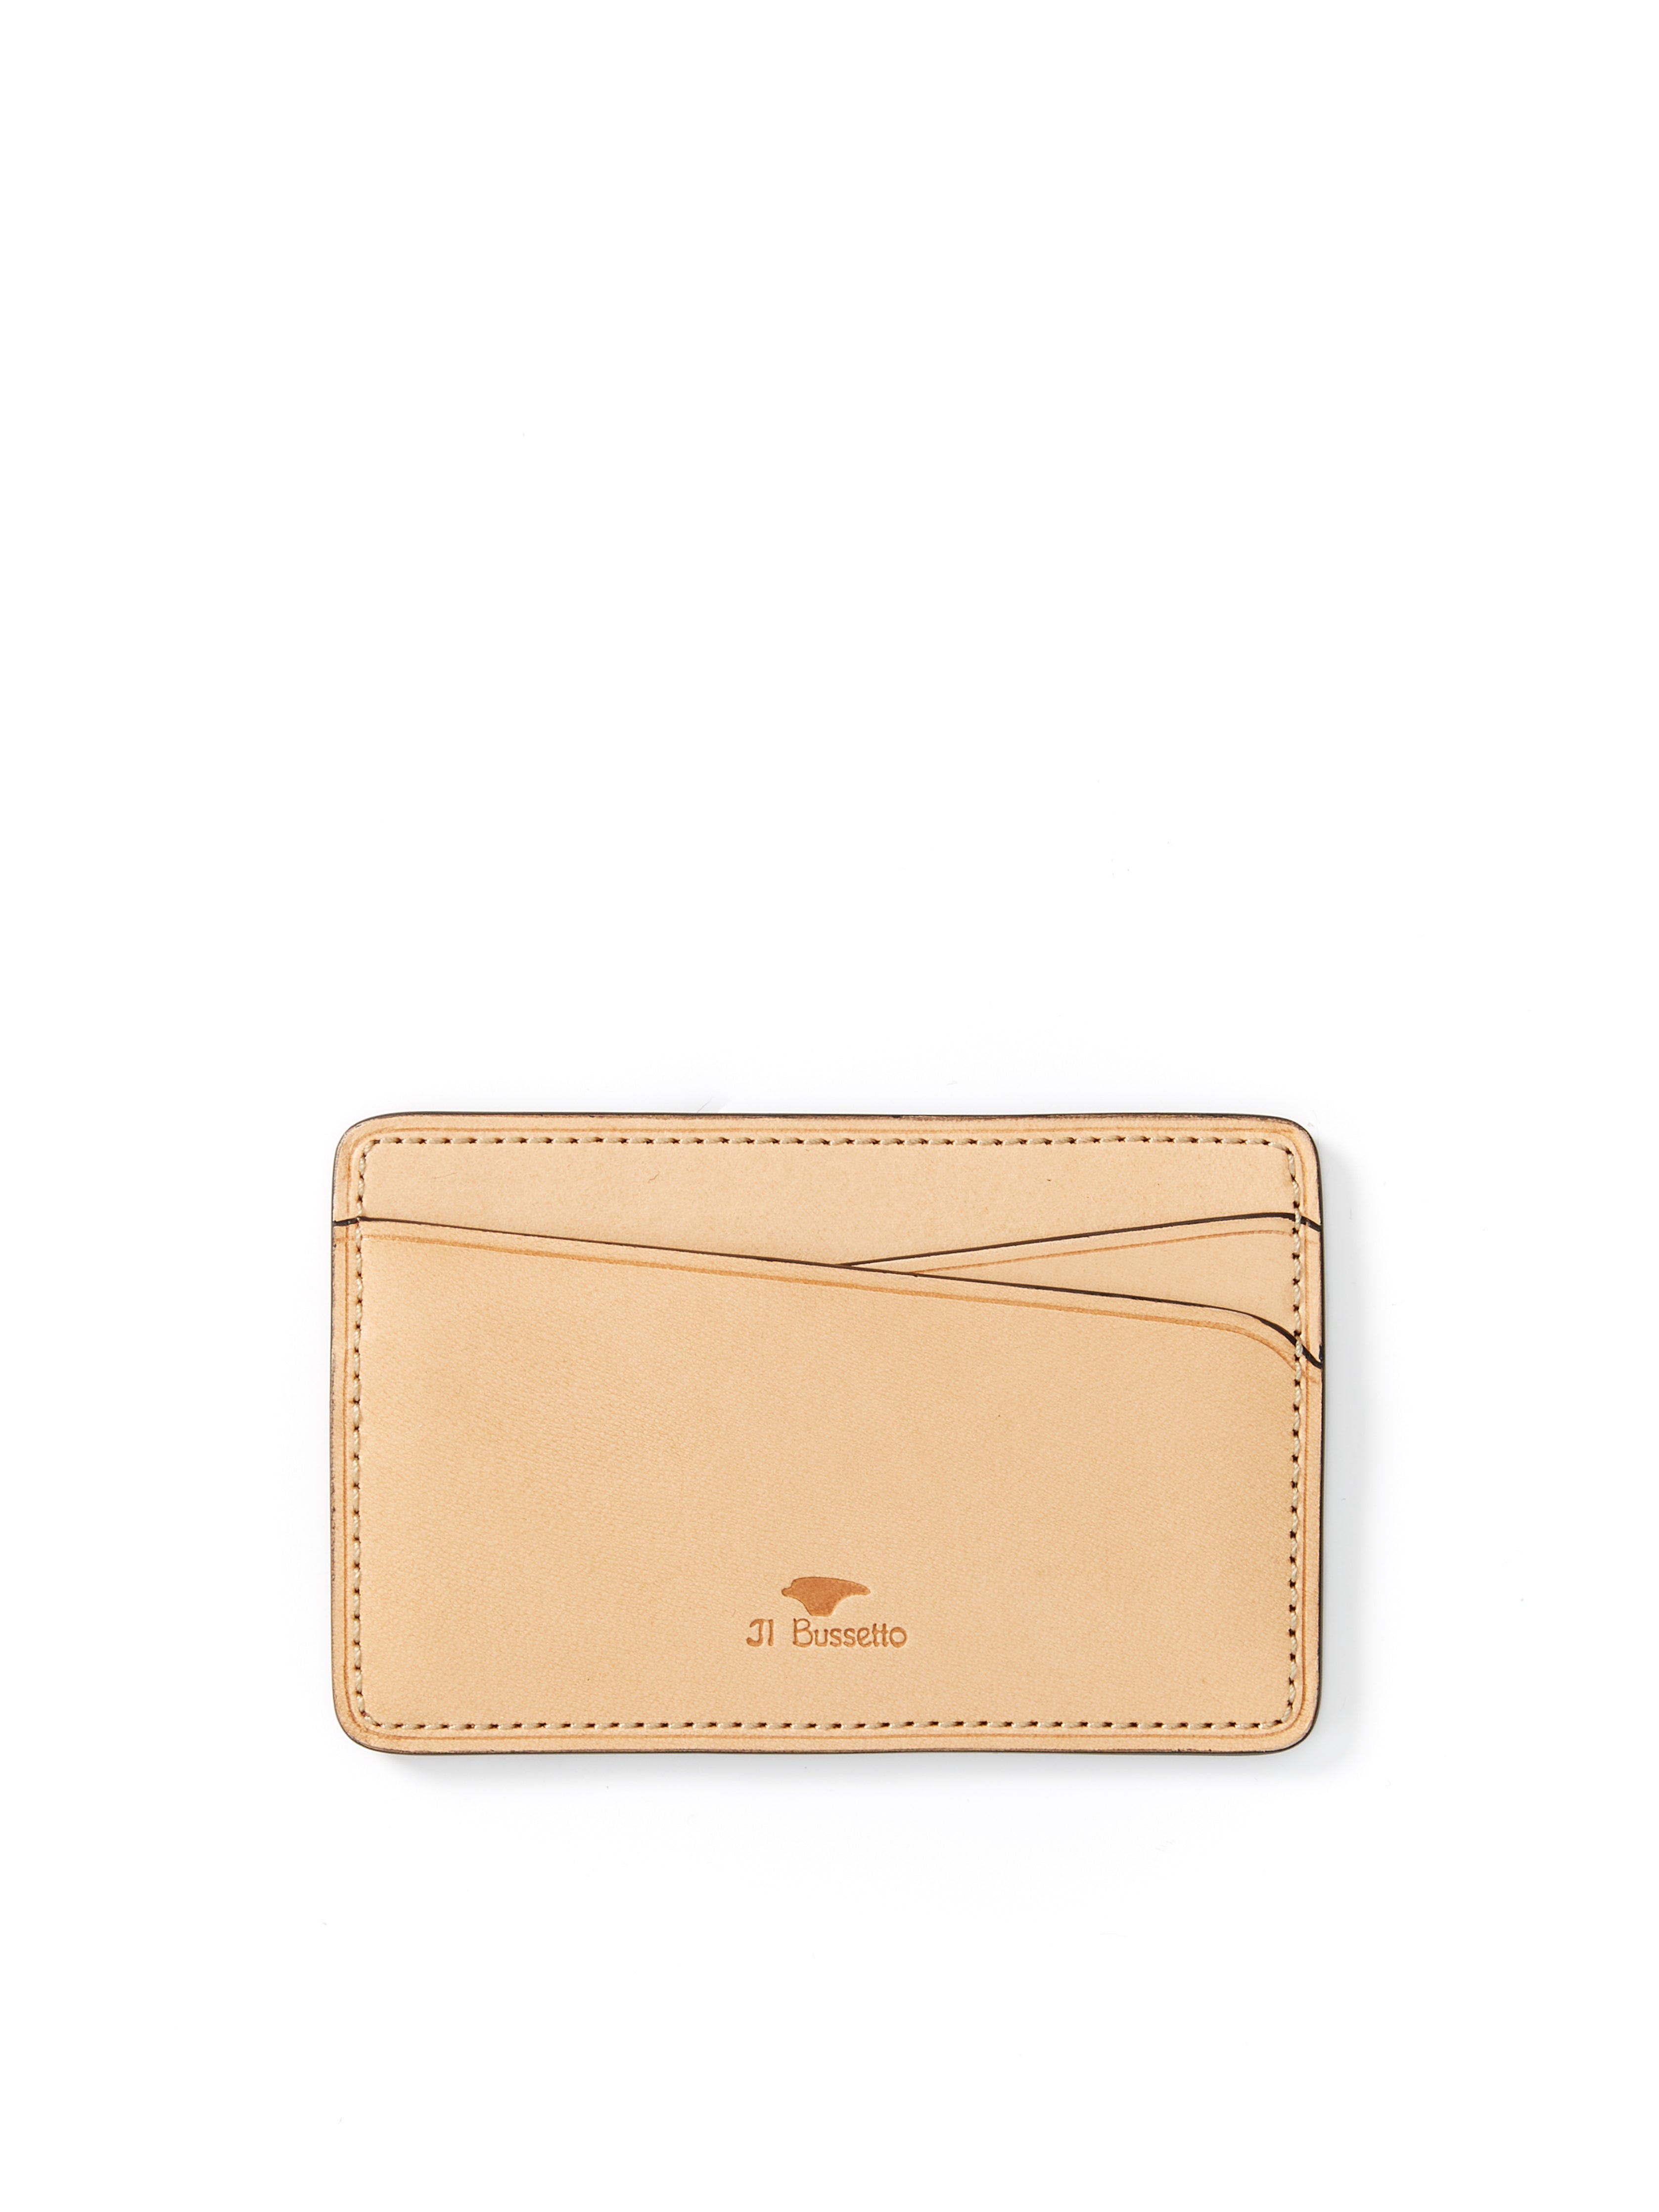 Il Bussetto Card Holder Green Leather